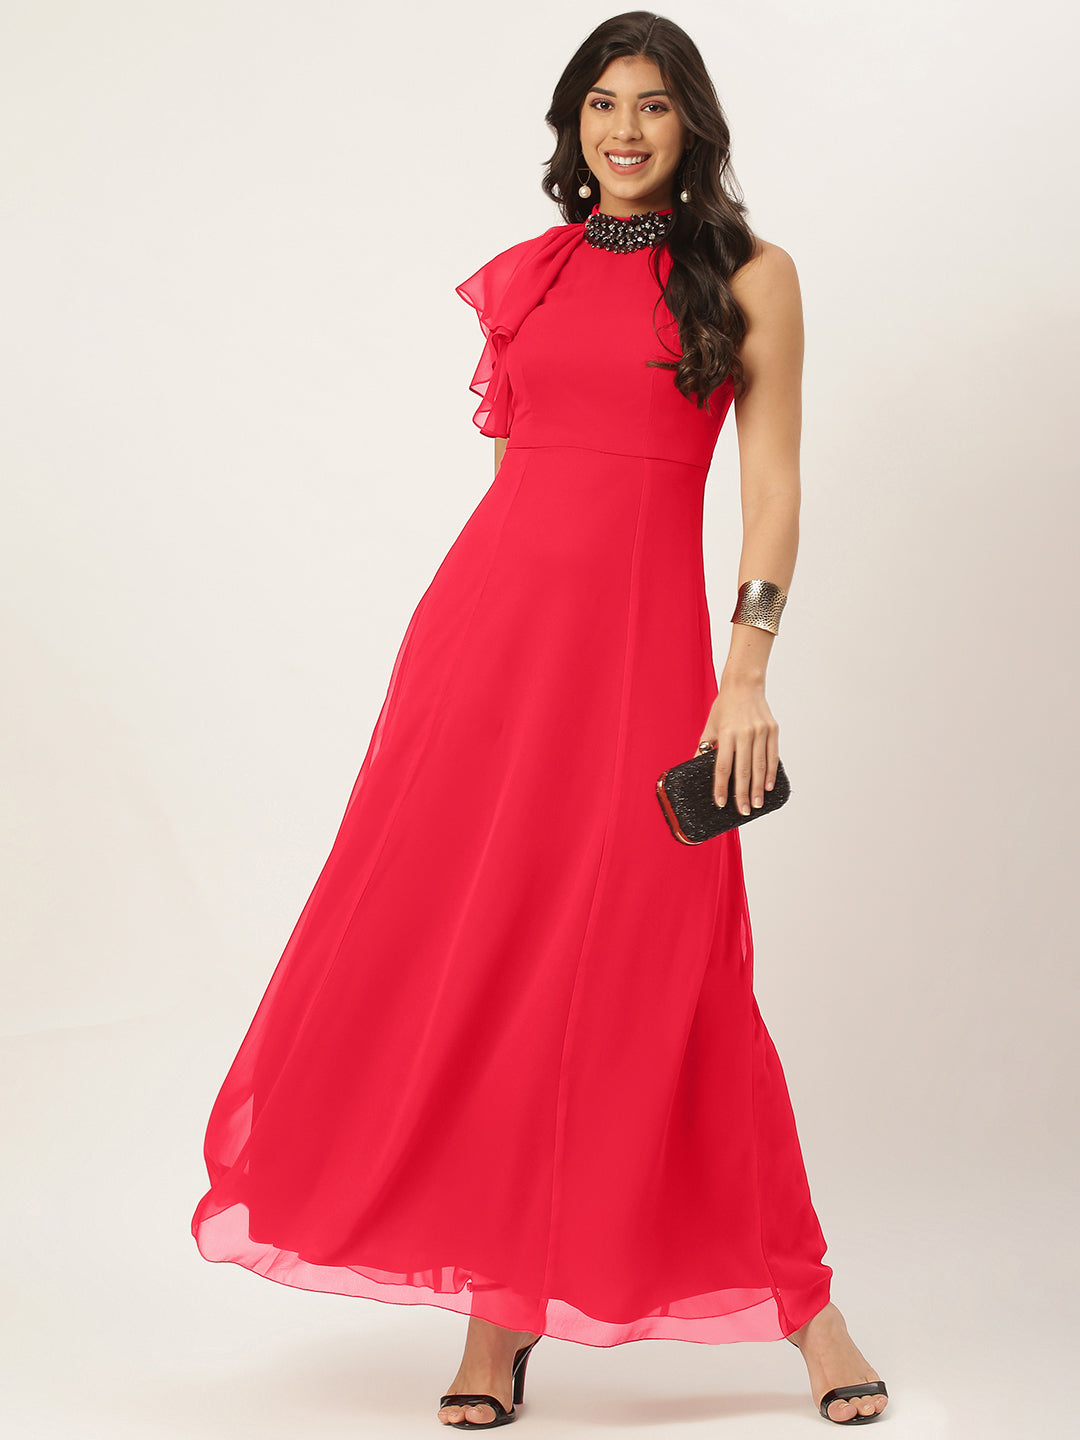 Red Embellished Gown | Embellished gown, Gowns, Embellished